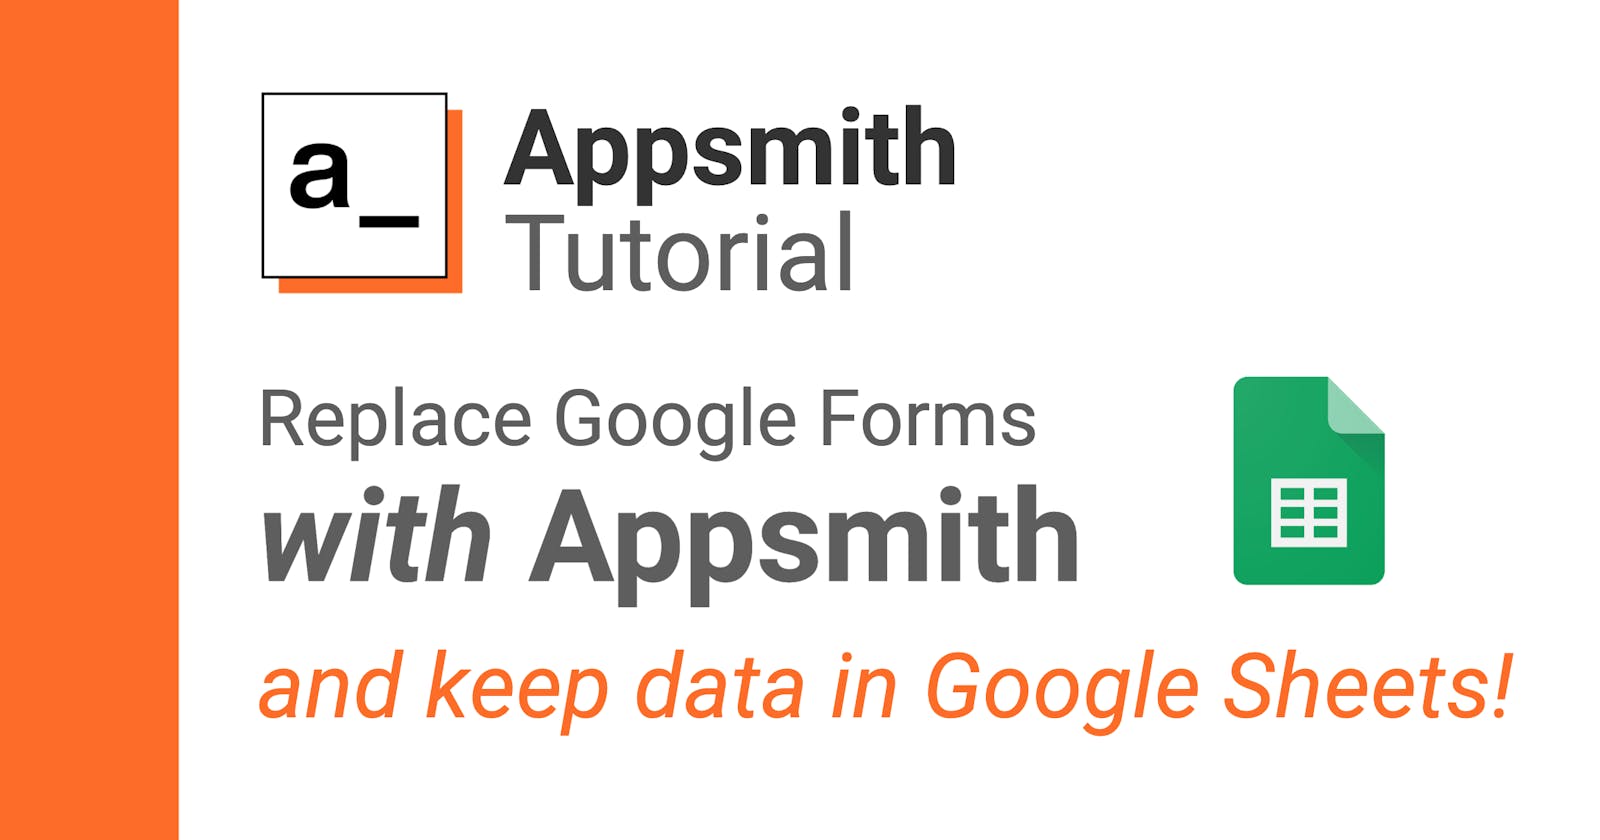 Replacing Google Forms with Appsmith